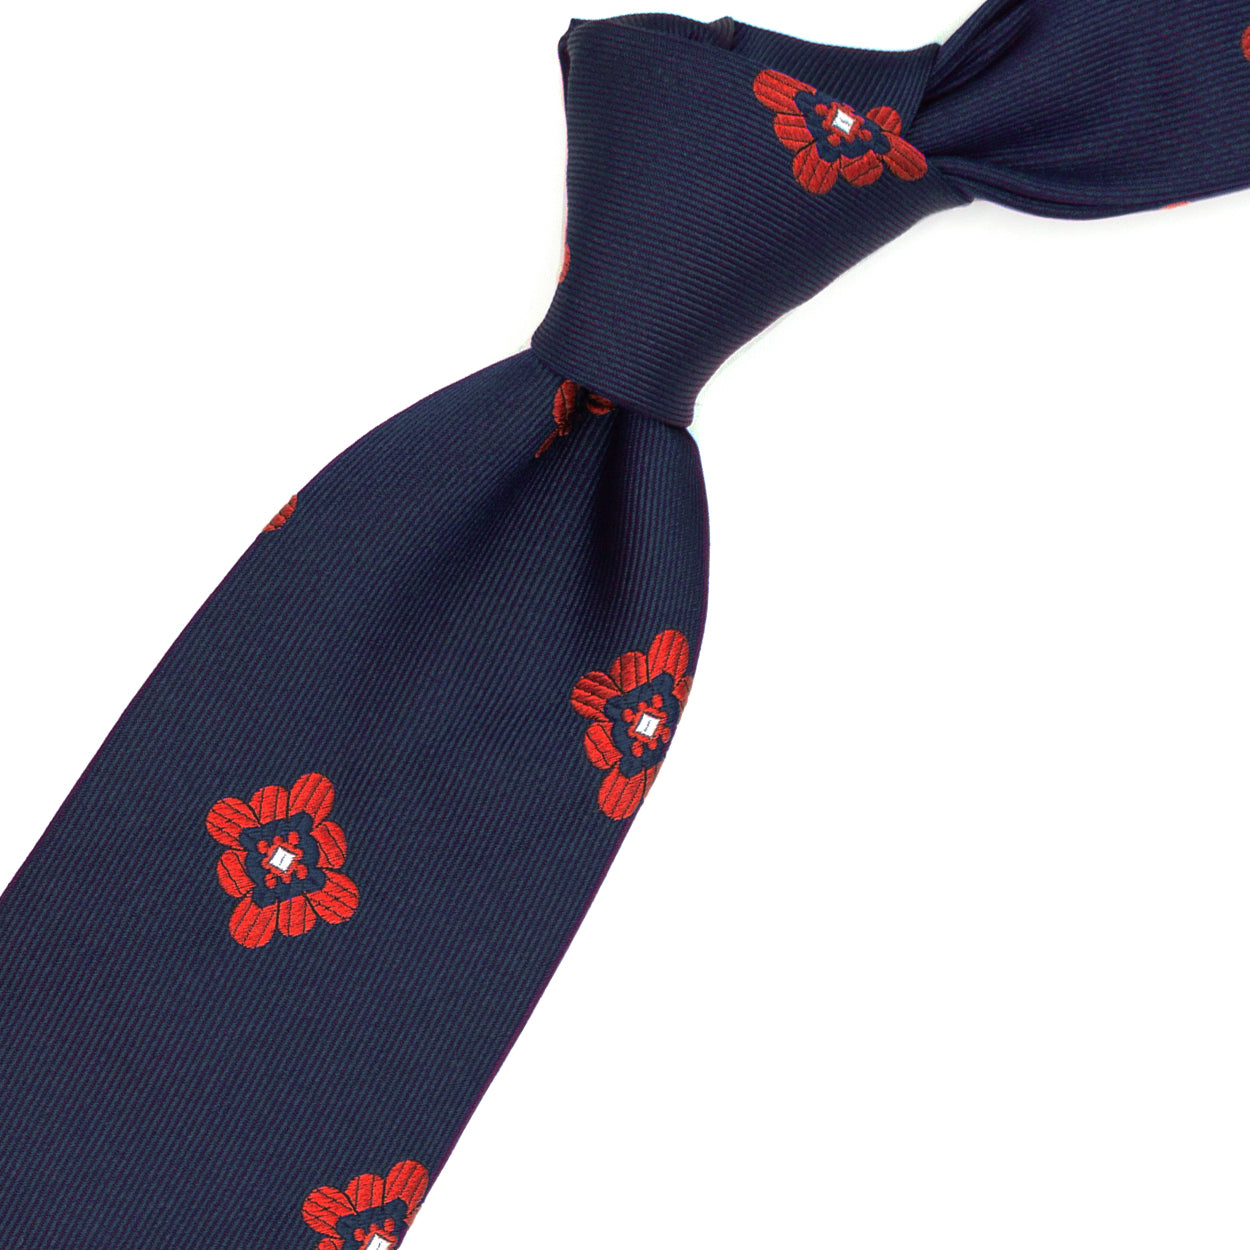 Blue tie with red flowers